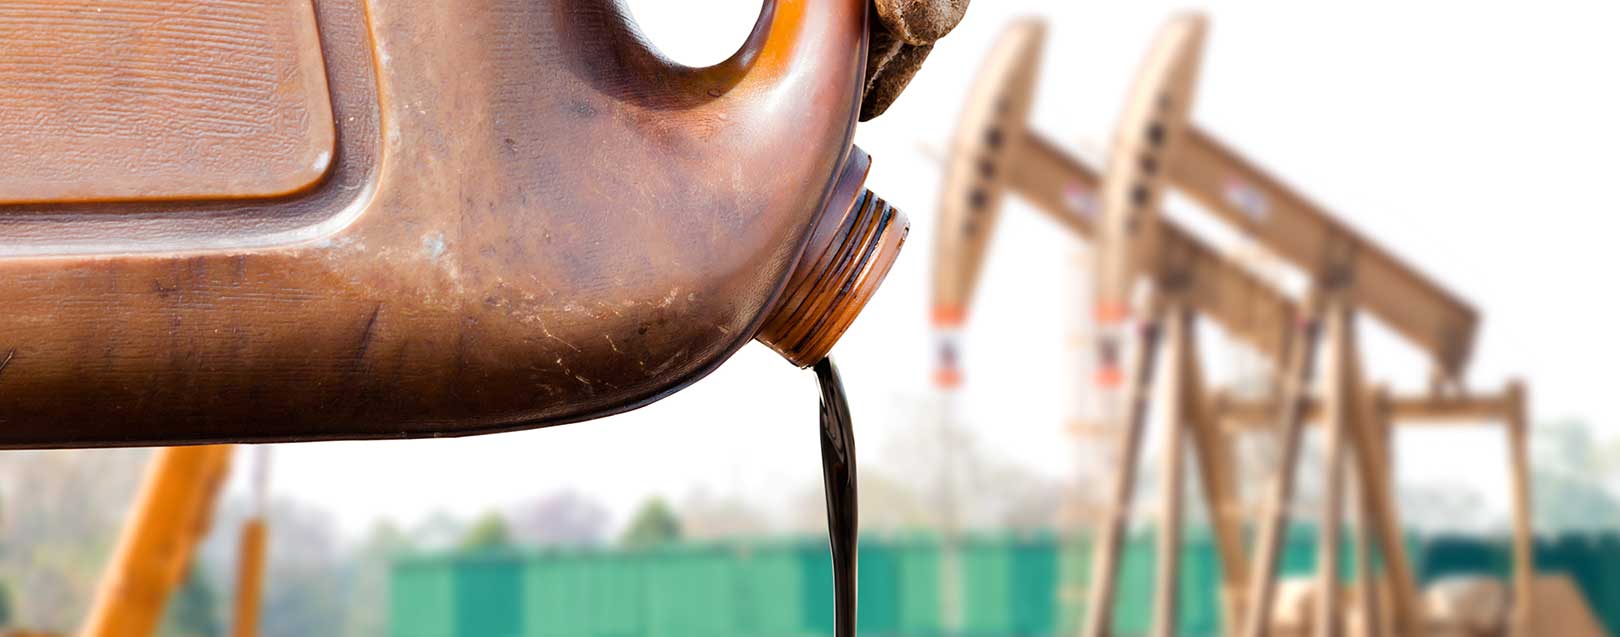 Oil prices decline on concerns of oversupply